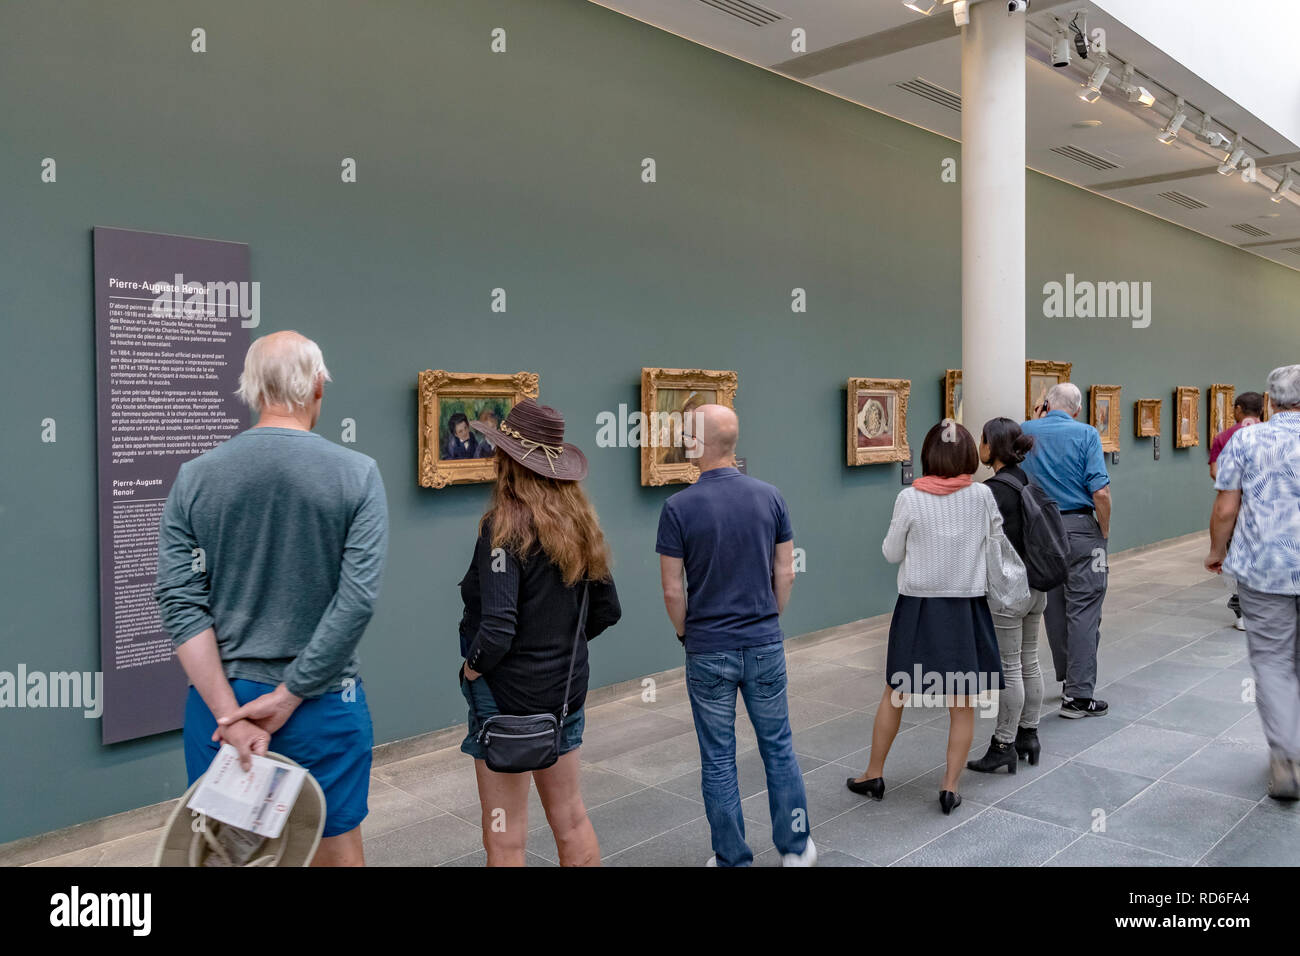 People admiring the impressionist paintings housed in The basement area of The Musée de l'Orangerie ,Paris, France Stock Photo